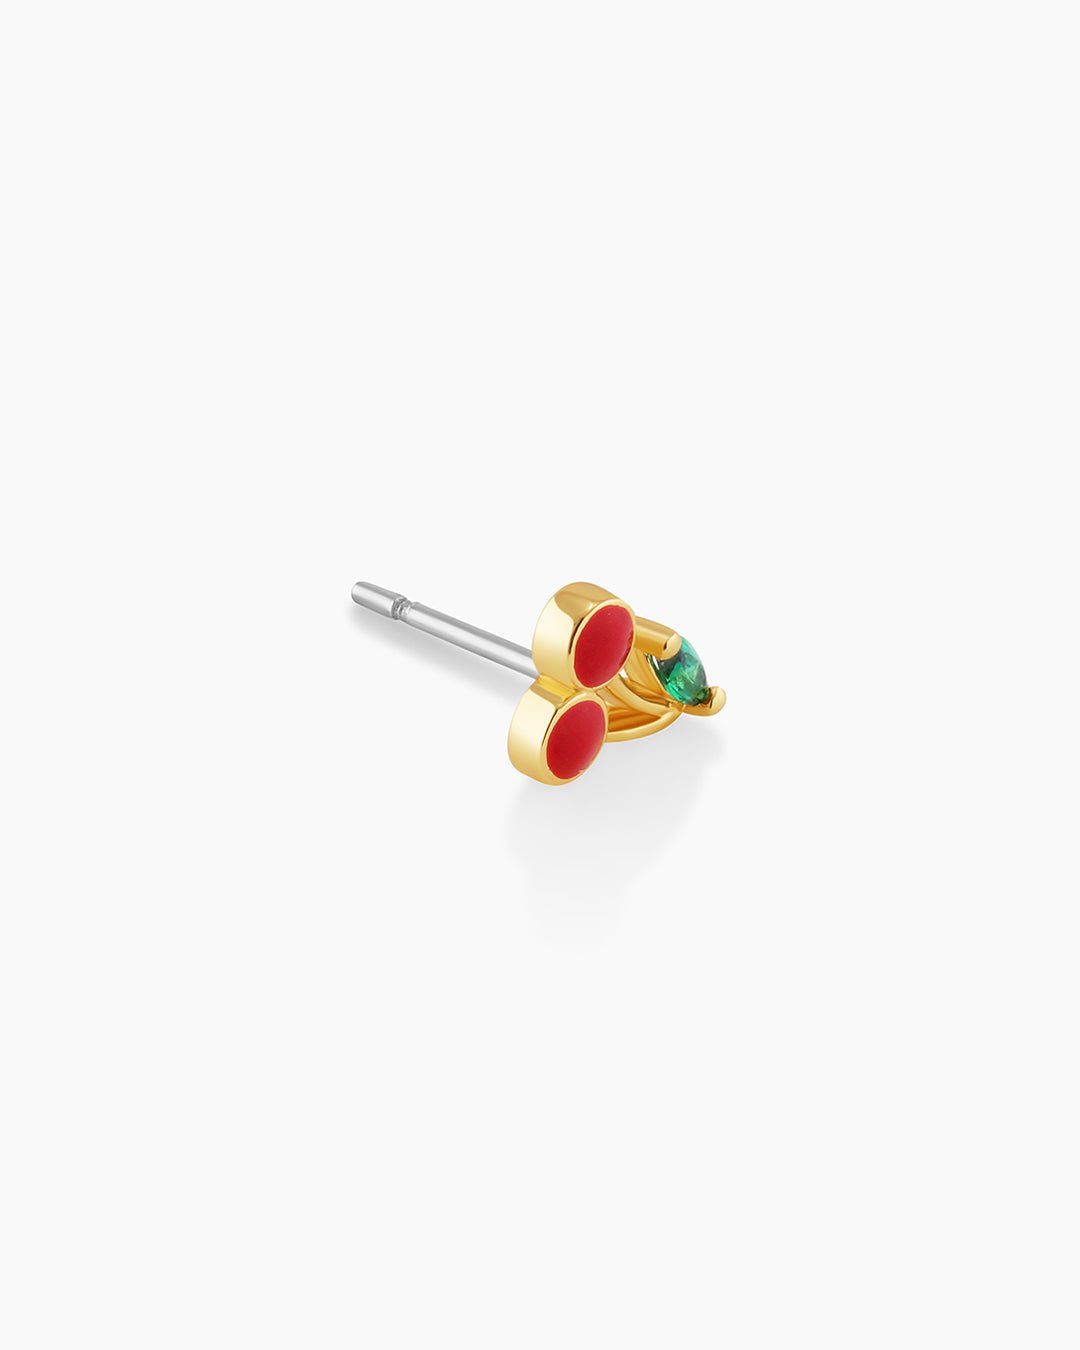  Cherry Charm Stud  Cherry Earrings || option::Gold Plated, Cherry